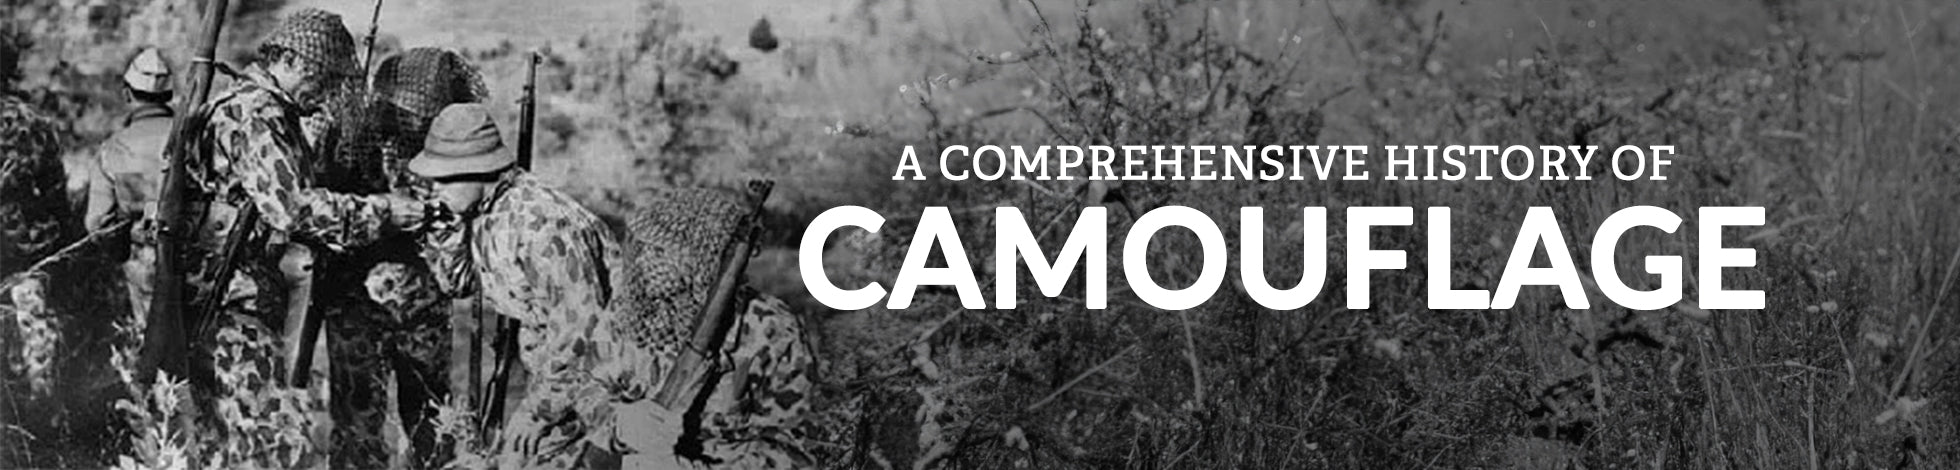 History of Camouflage